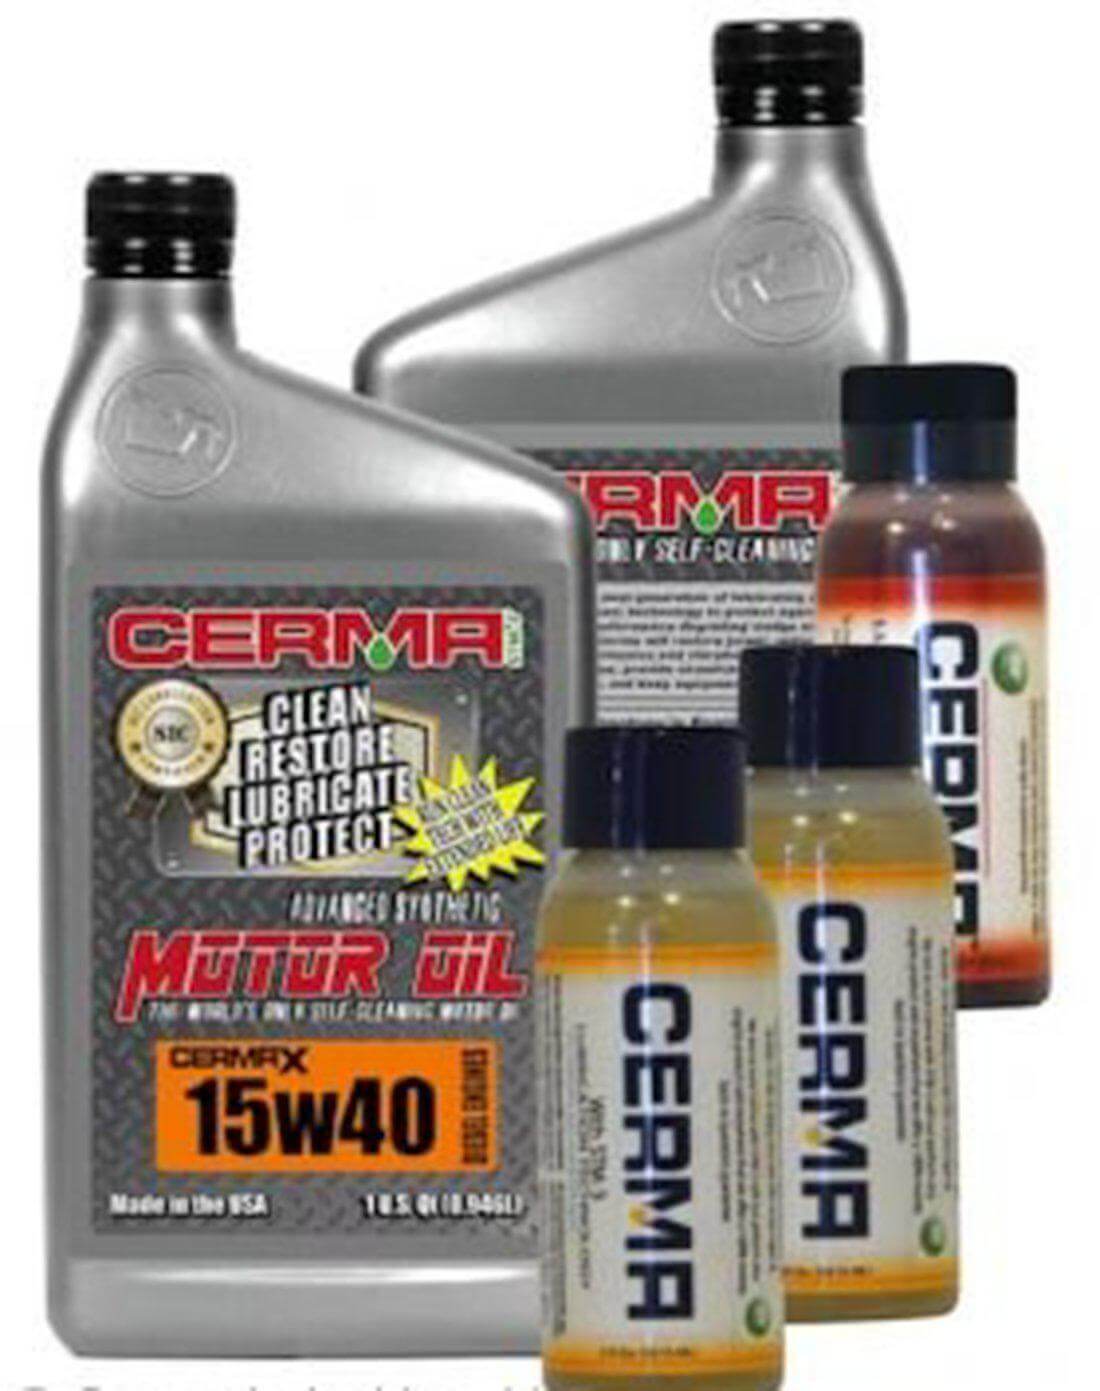 Cermax Diesel Ceramic Synthetic Oil Value Package for 3 To 4.8 Liter Engines at $269.5 only from cermatreatment.com